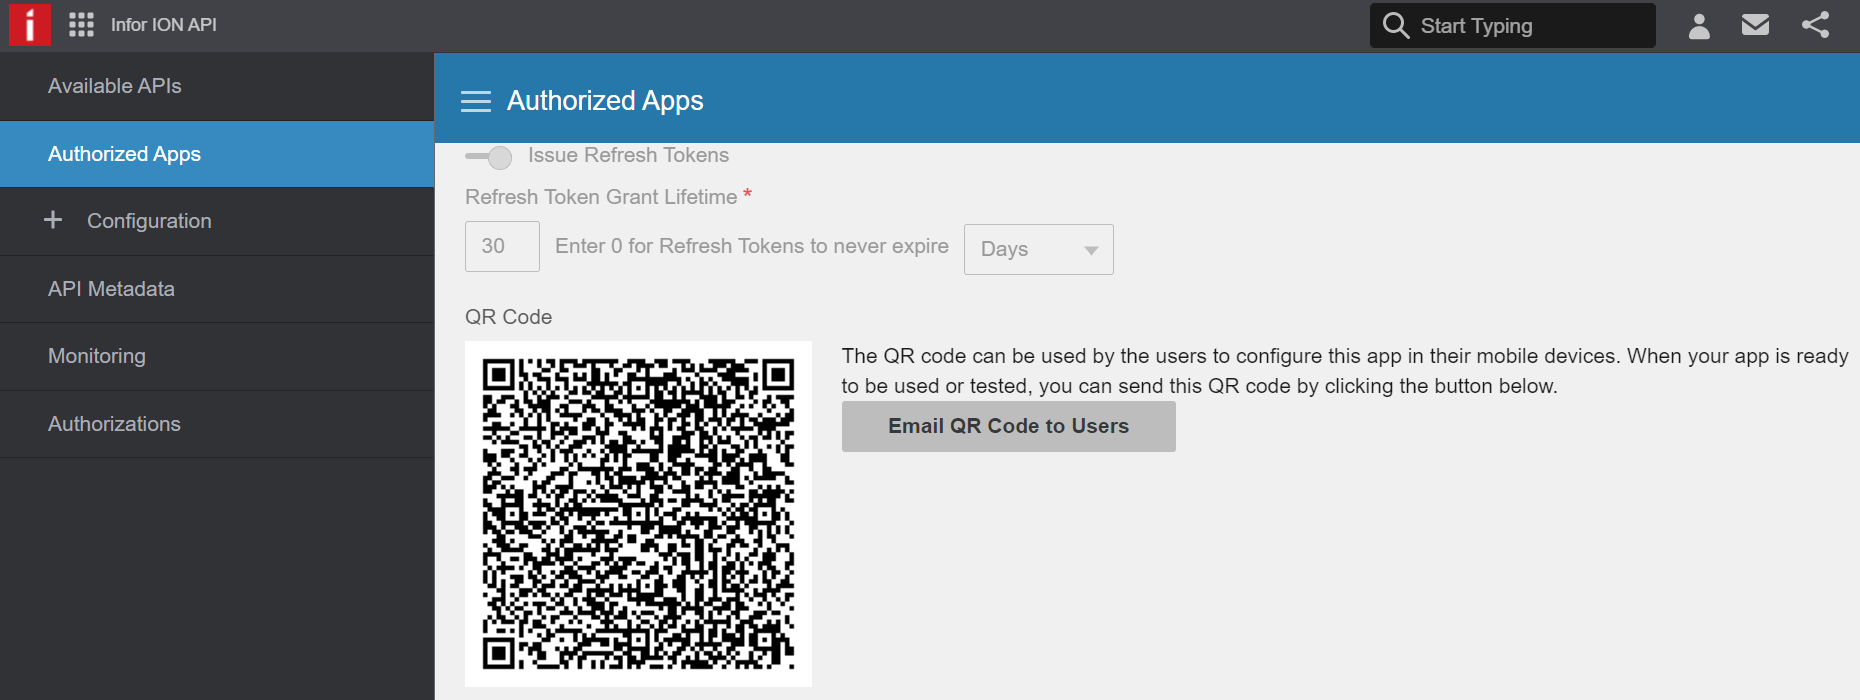 Email QR code to users